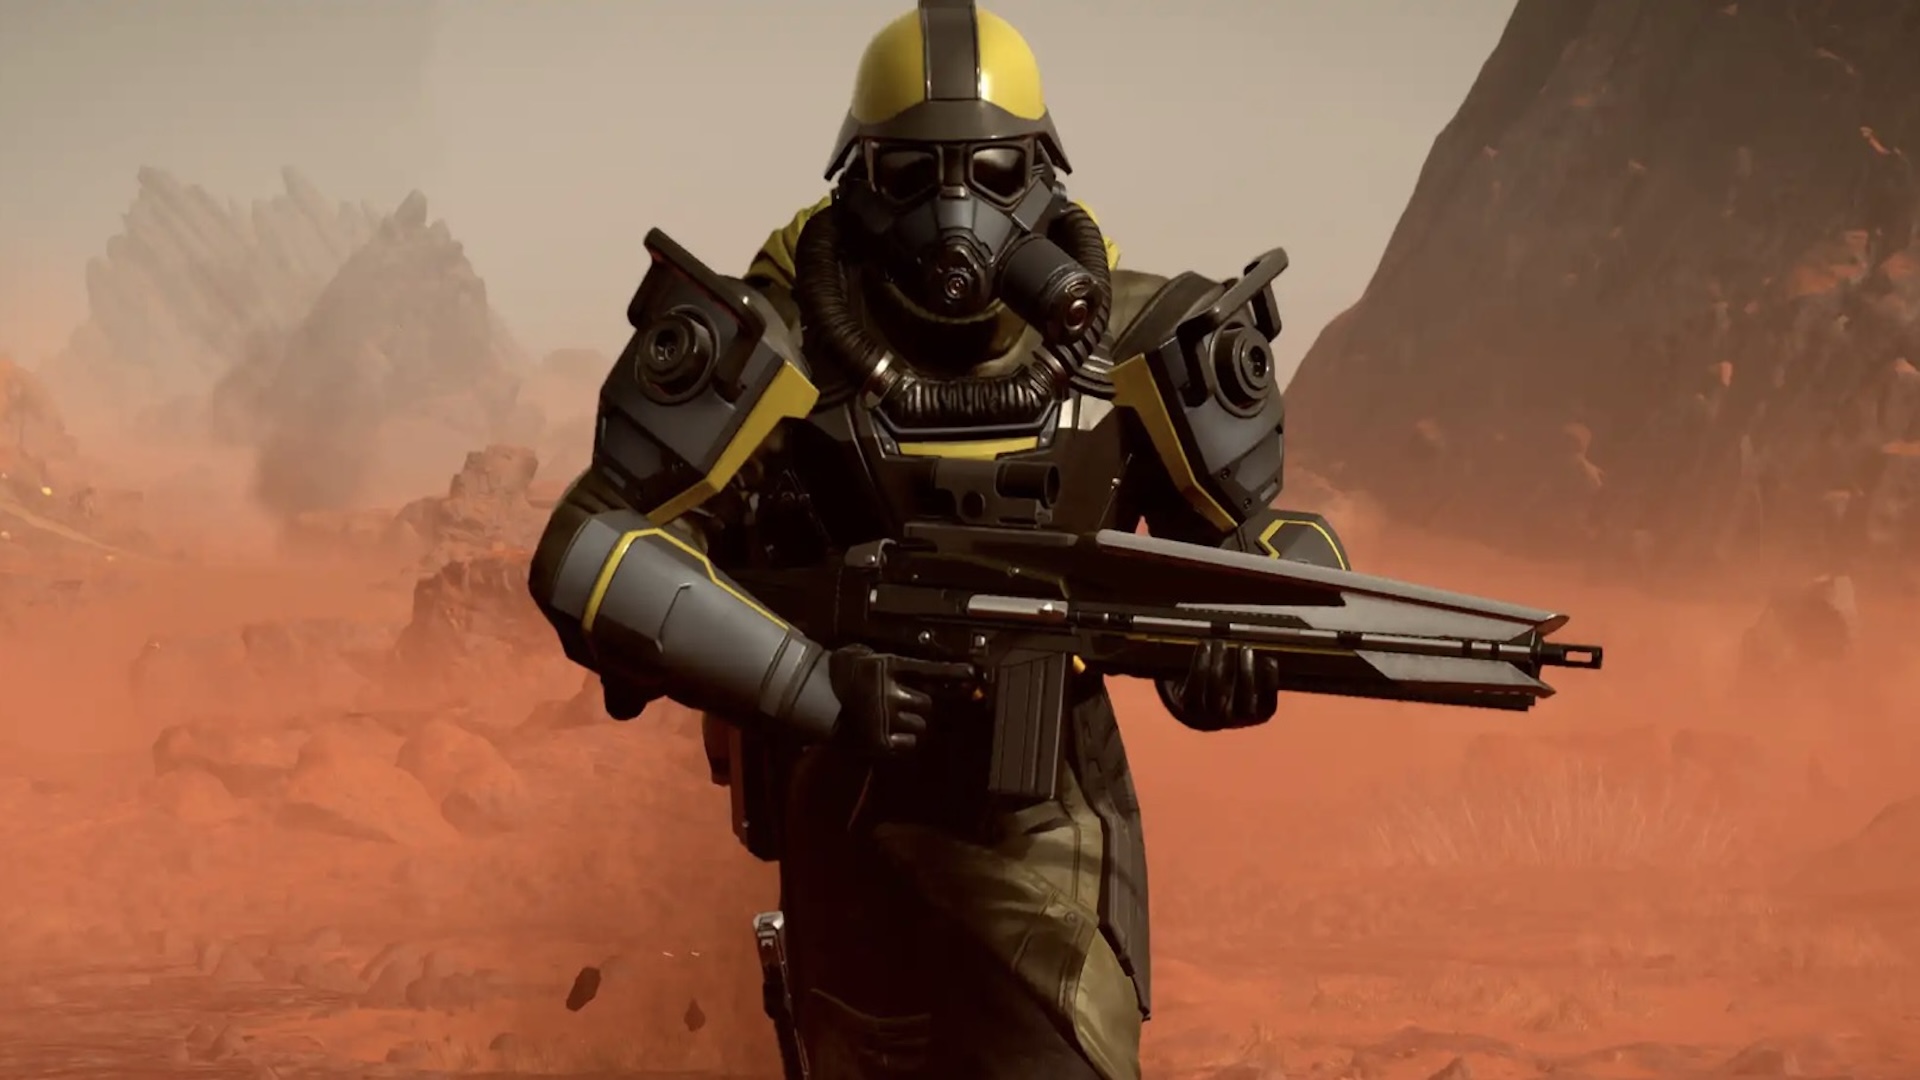 A Helldiver wears the CE-27 yellow and black Ground Breaker armor and runs towards the camera across a desert planet